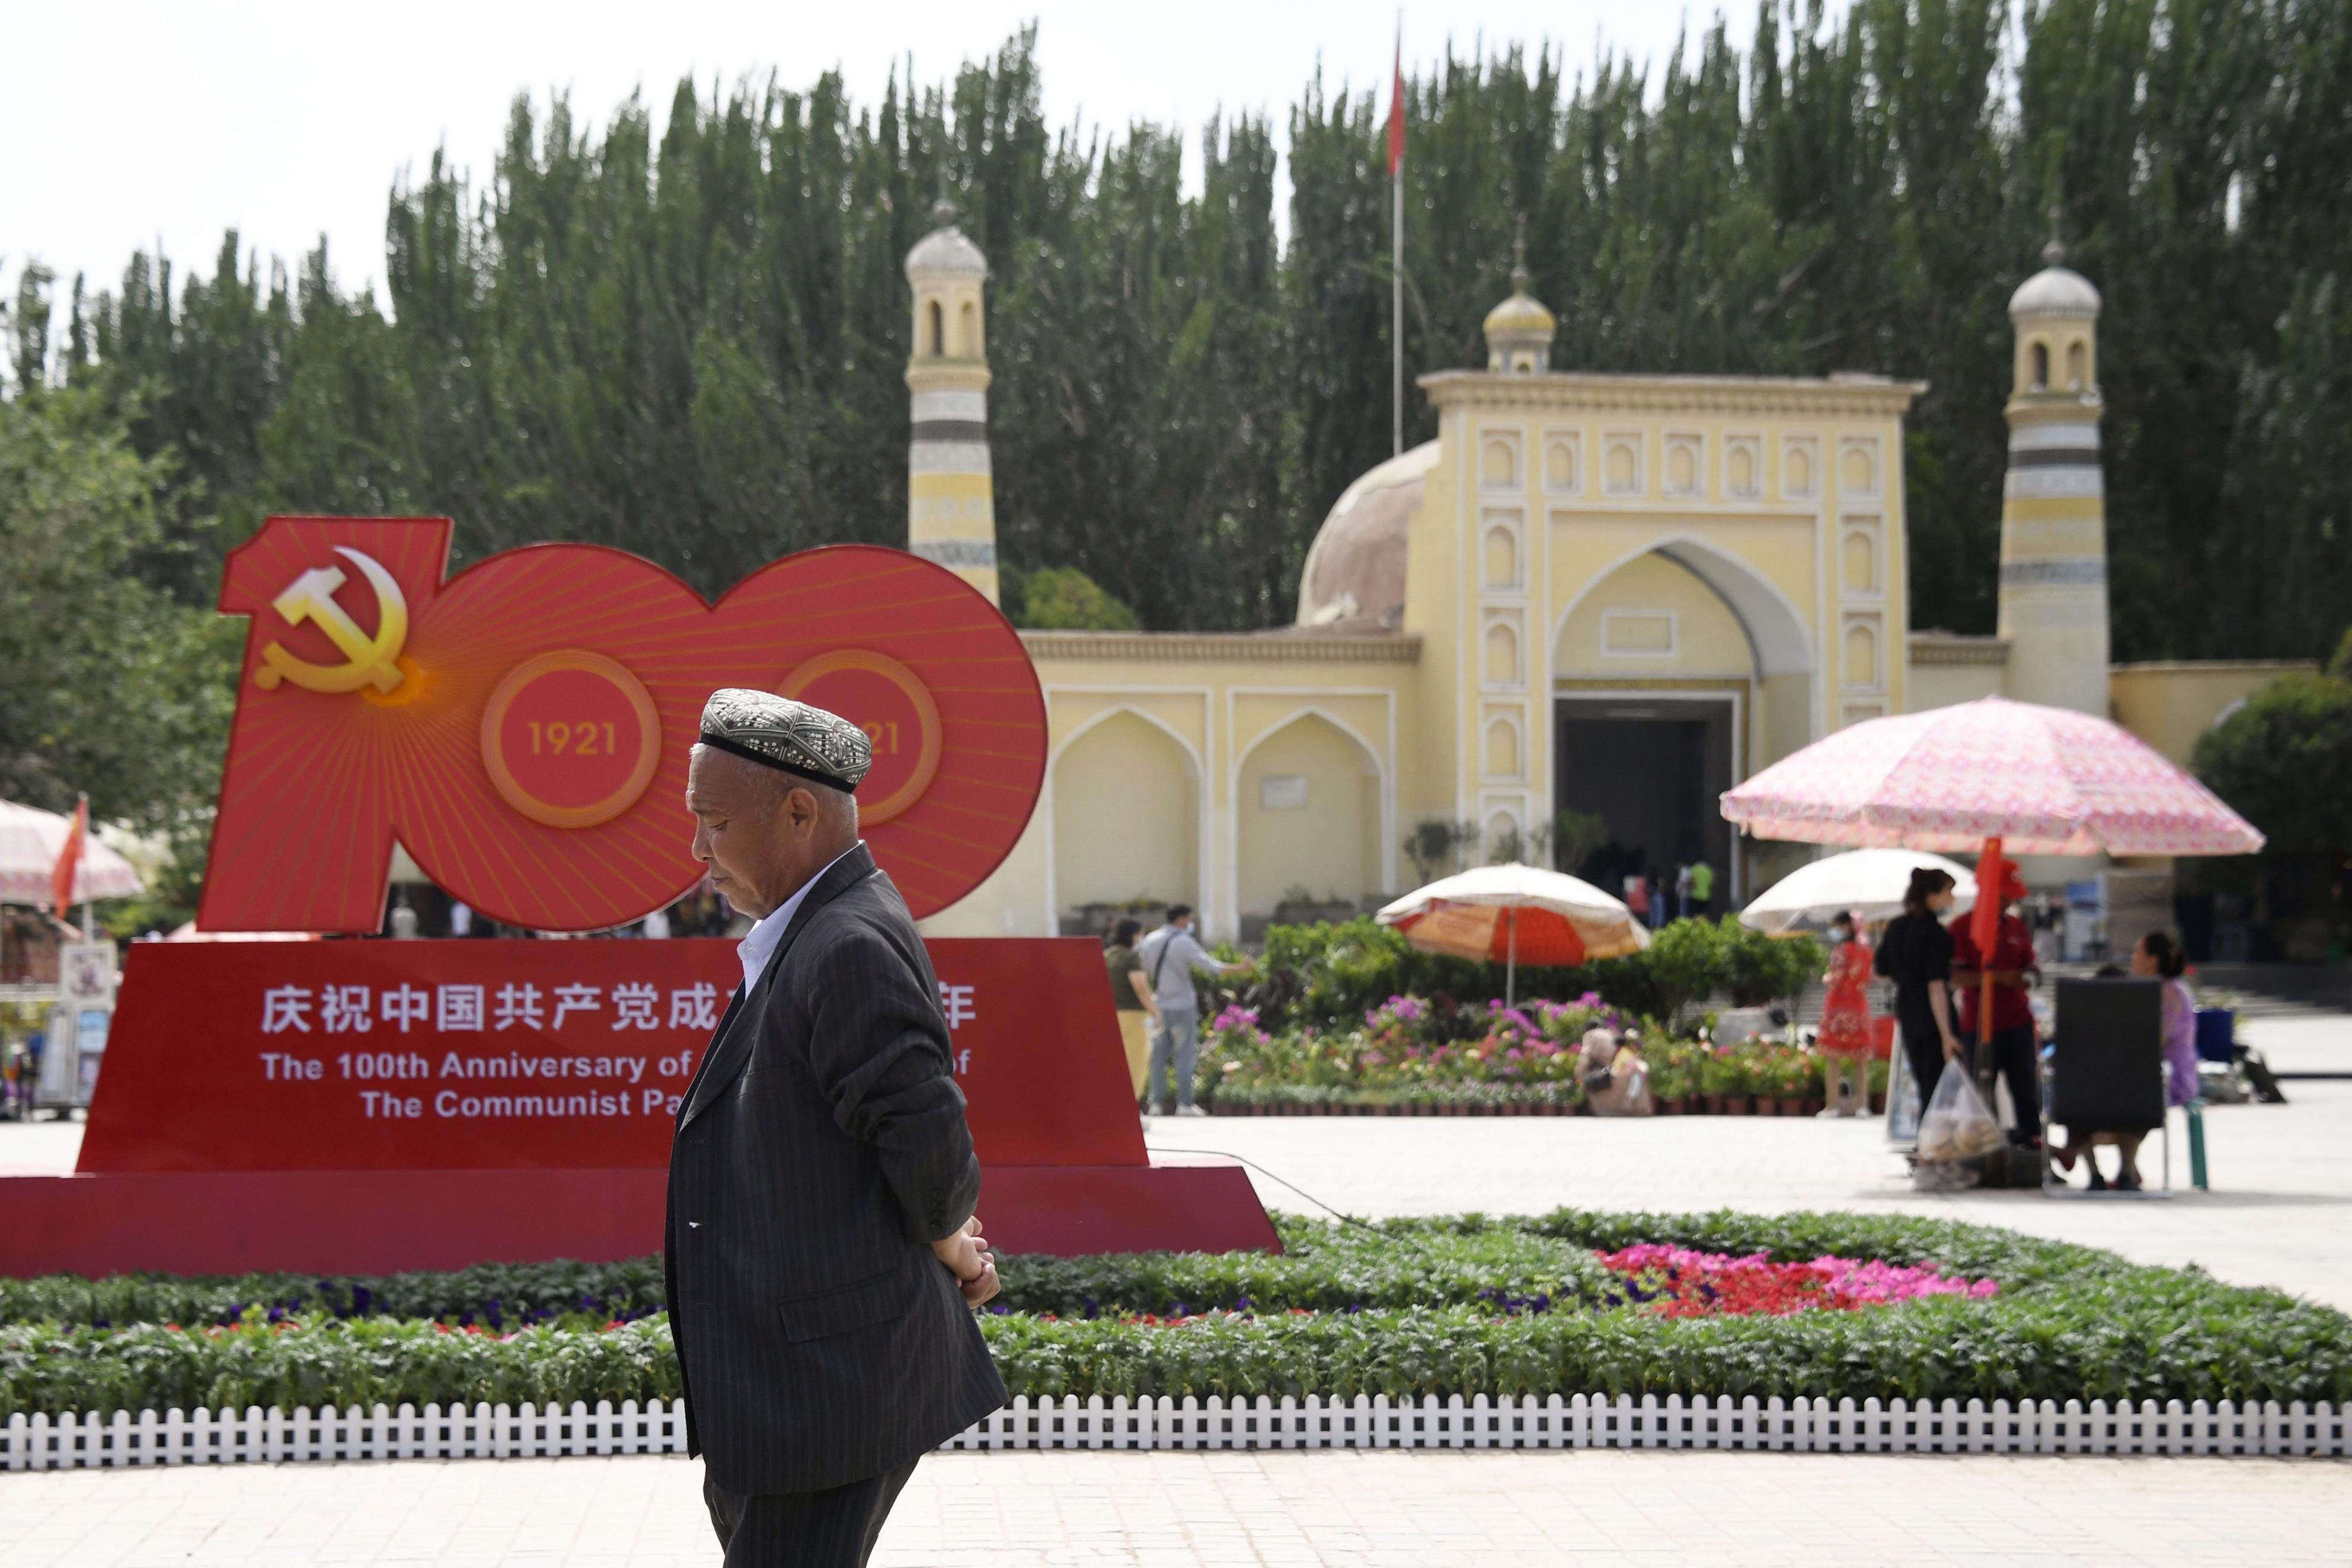 Xinjiang is home to a large population of mainly Muslim Uygurs. Photo: Kyodo